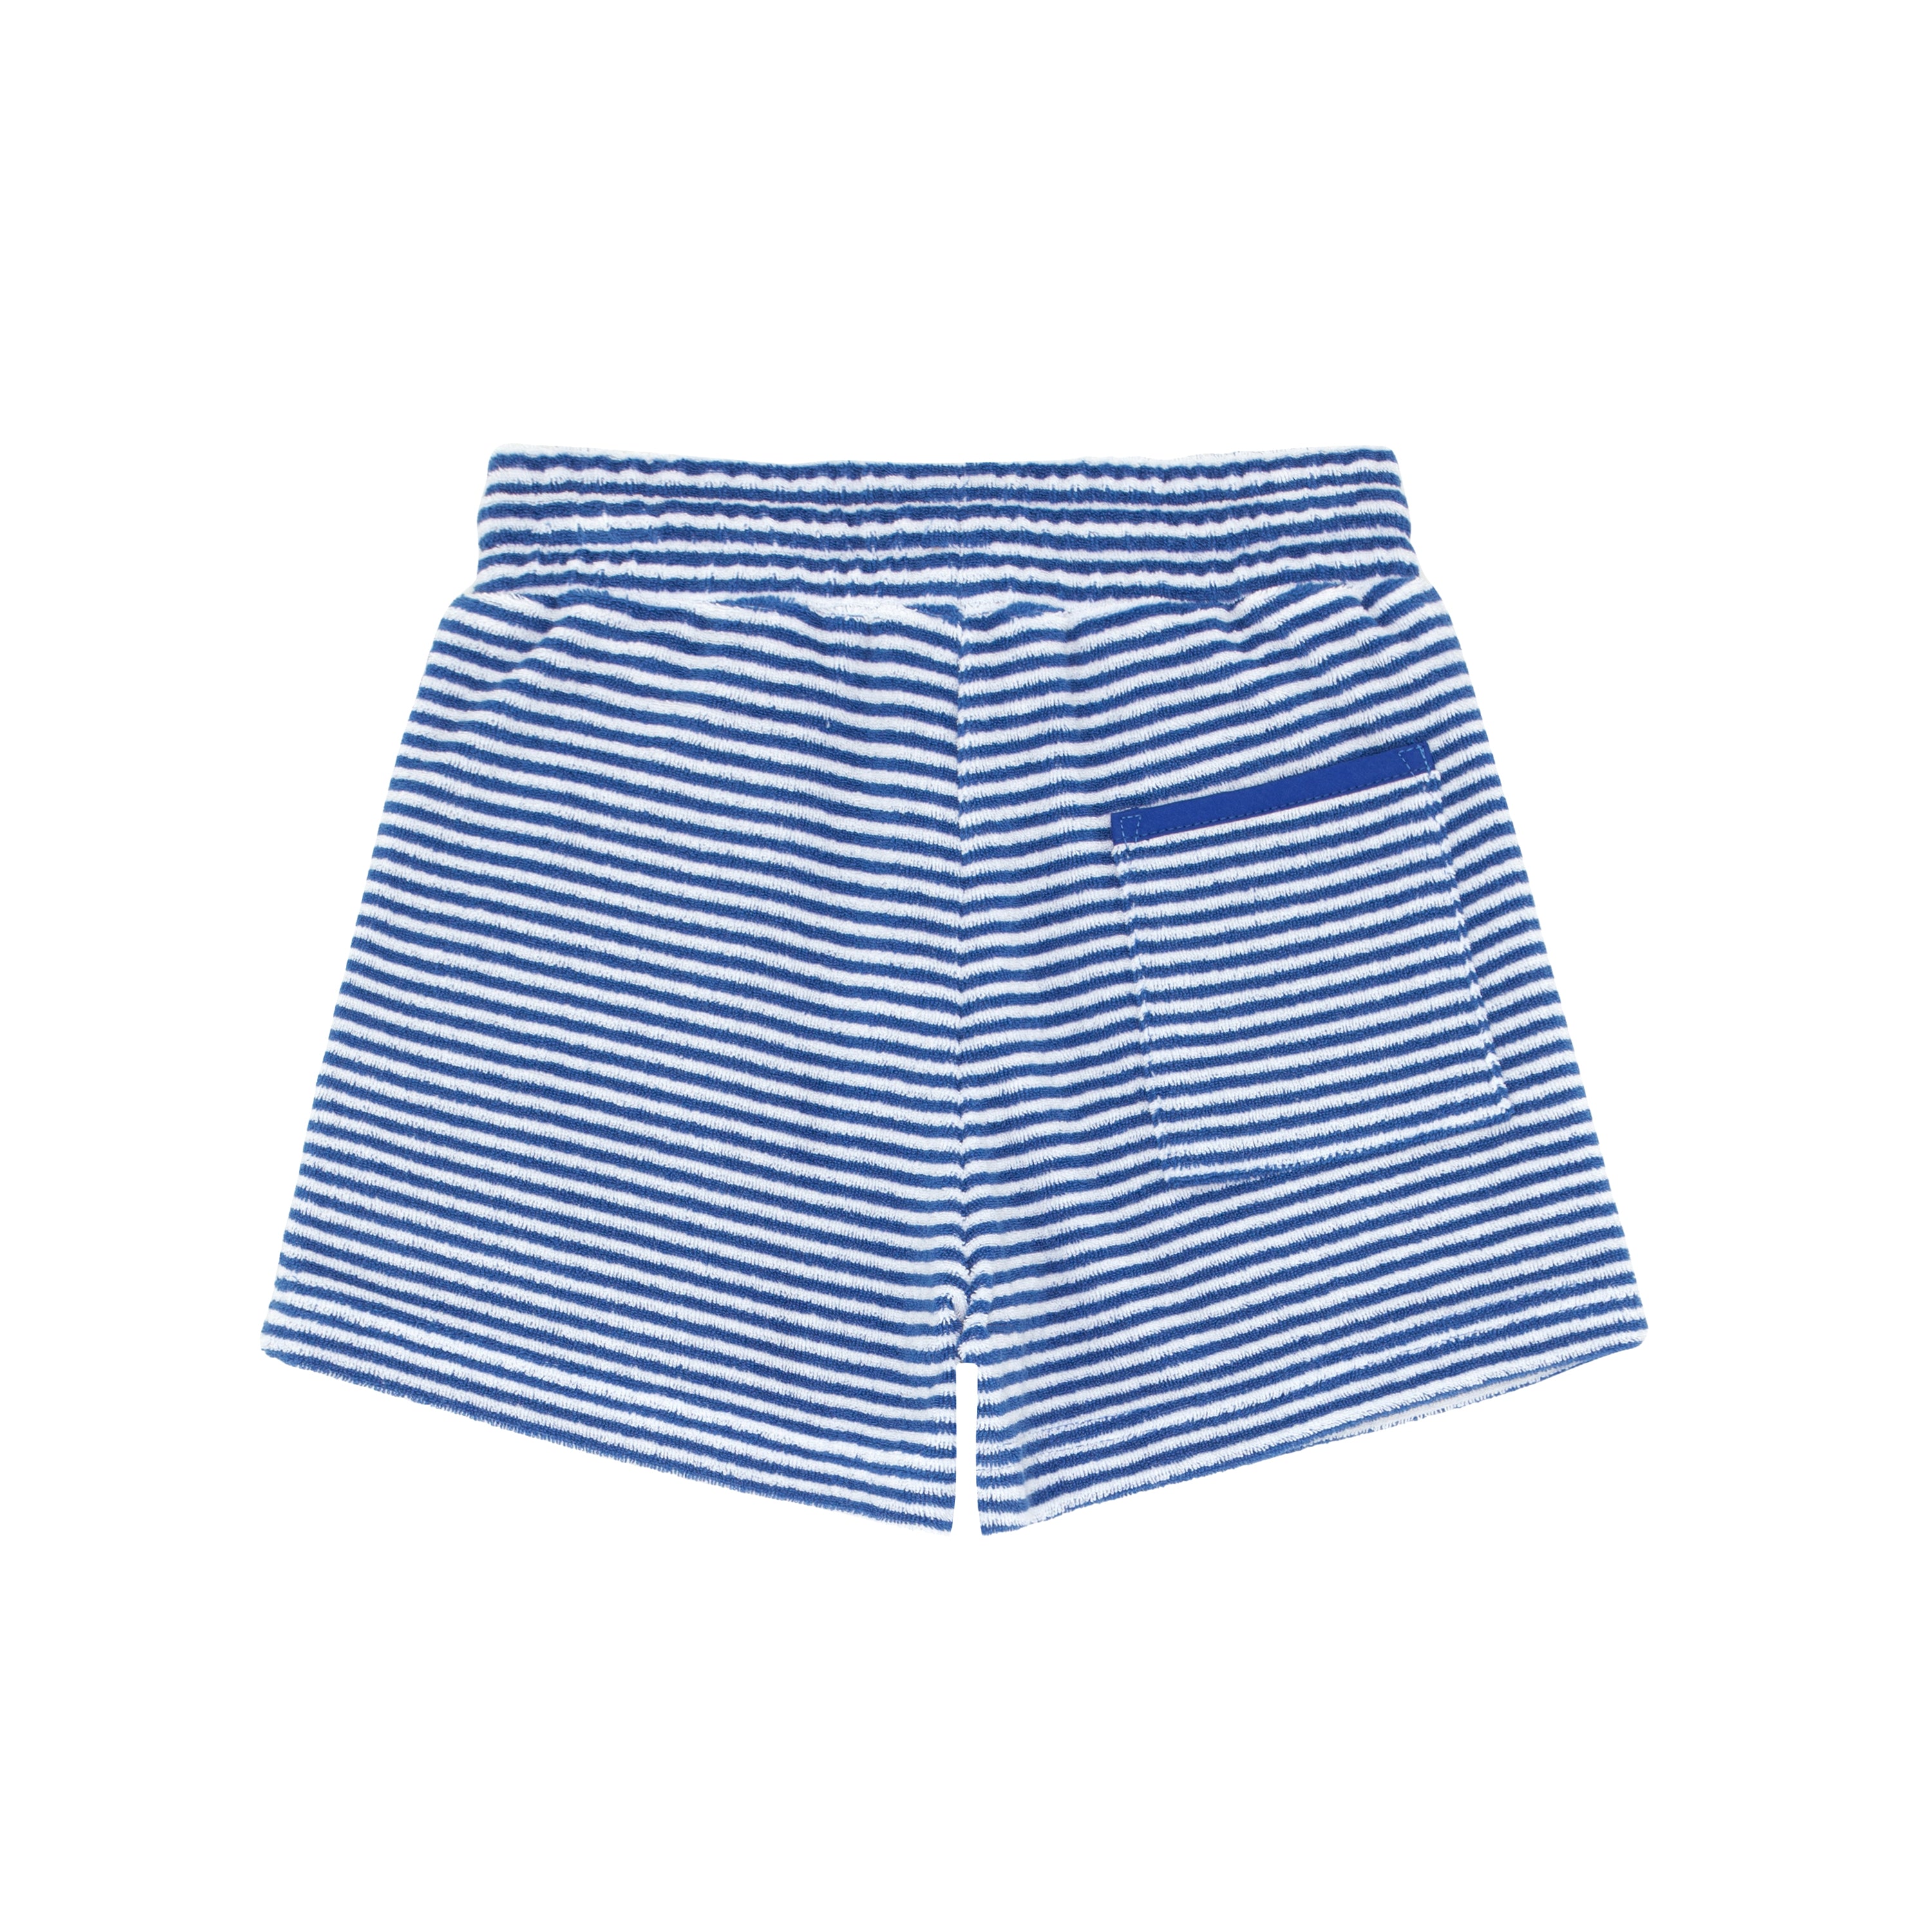 Boys Cove Blue Stripe French Terry Short